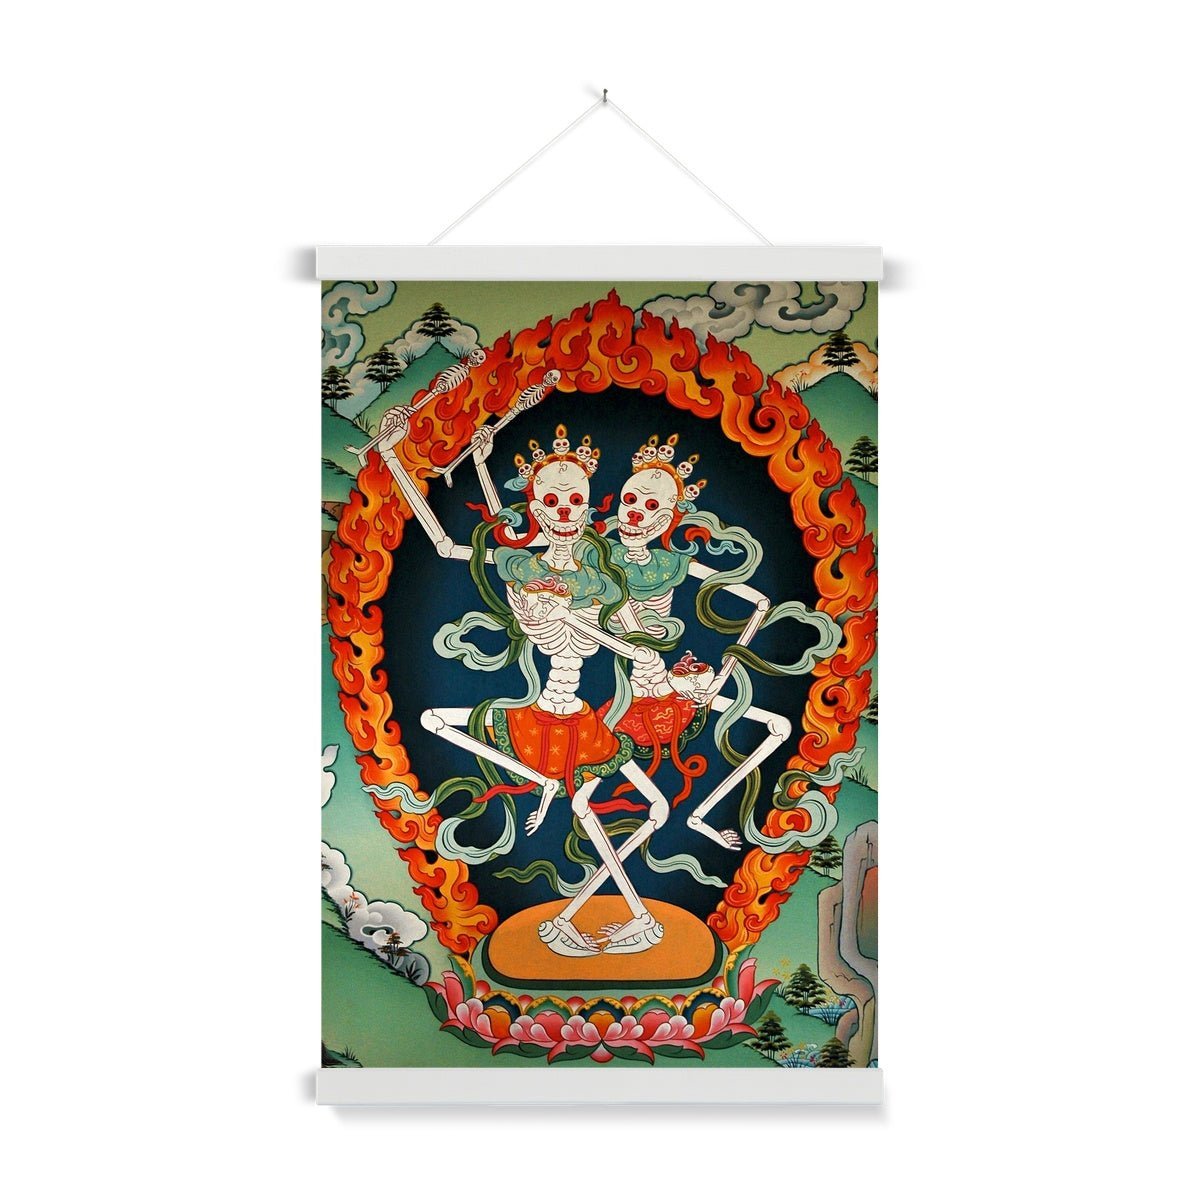 Fine art 6"x8" / White Frame Citipati, Tibetan Skeleton | Tantric Protector Vajrayana Thangka | Lord and Lady of the Cemetery | Buddhist Decor Fine Art Print with Hangar